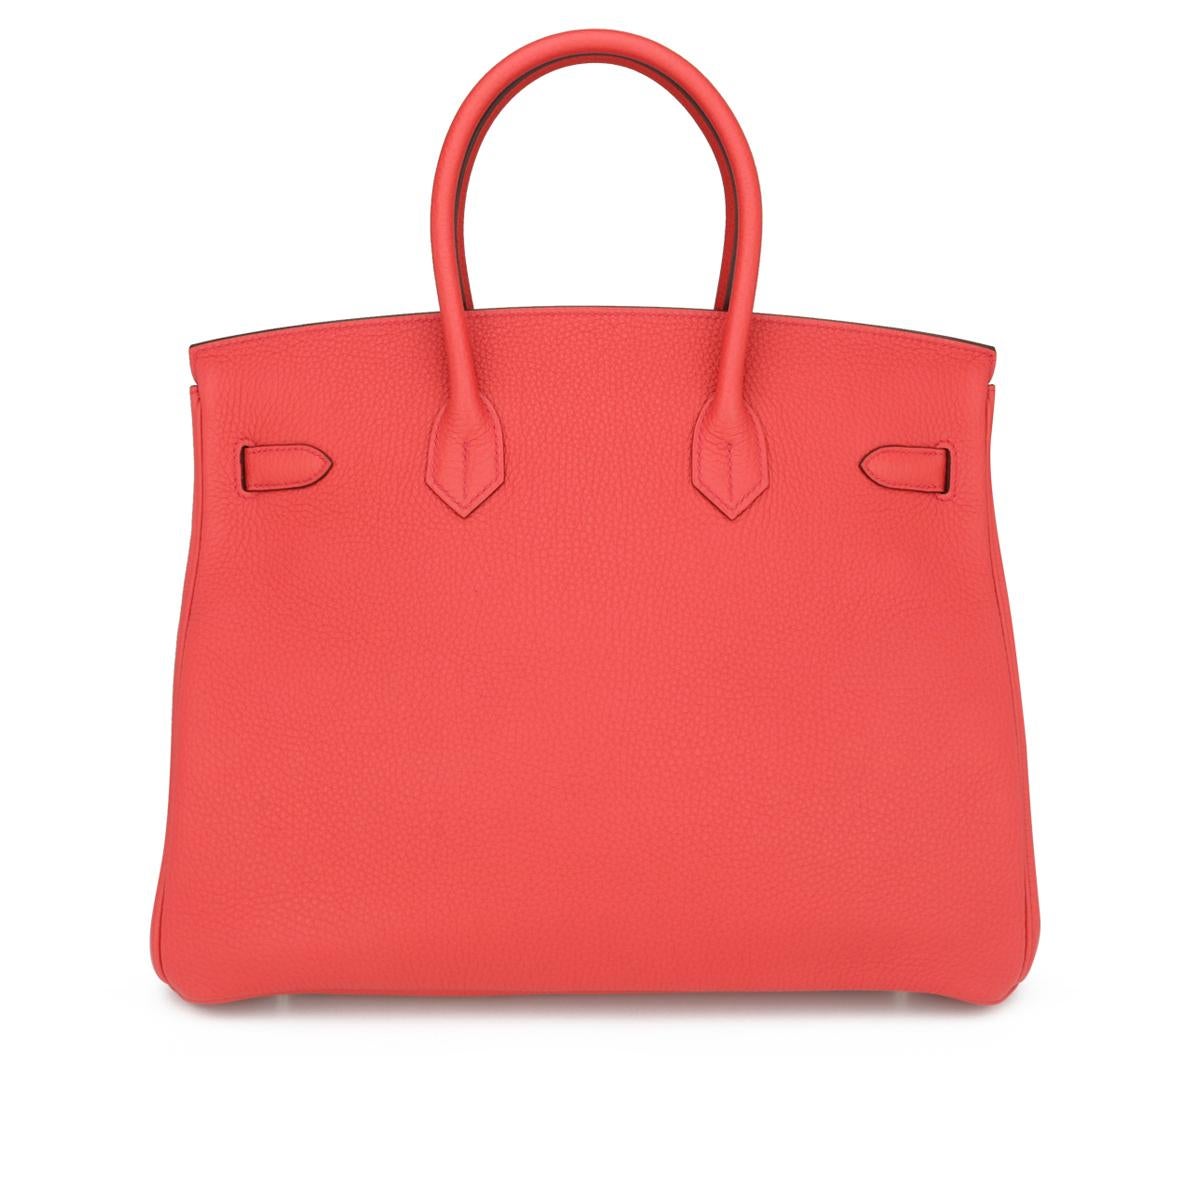 Red Hermès Birkin Bag 35cm Bougainvillier Taurillon Clemence Leather w/PHW 2017